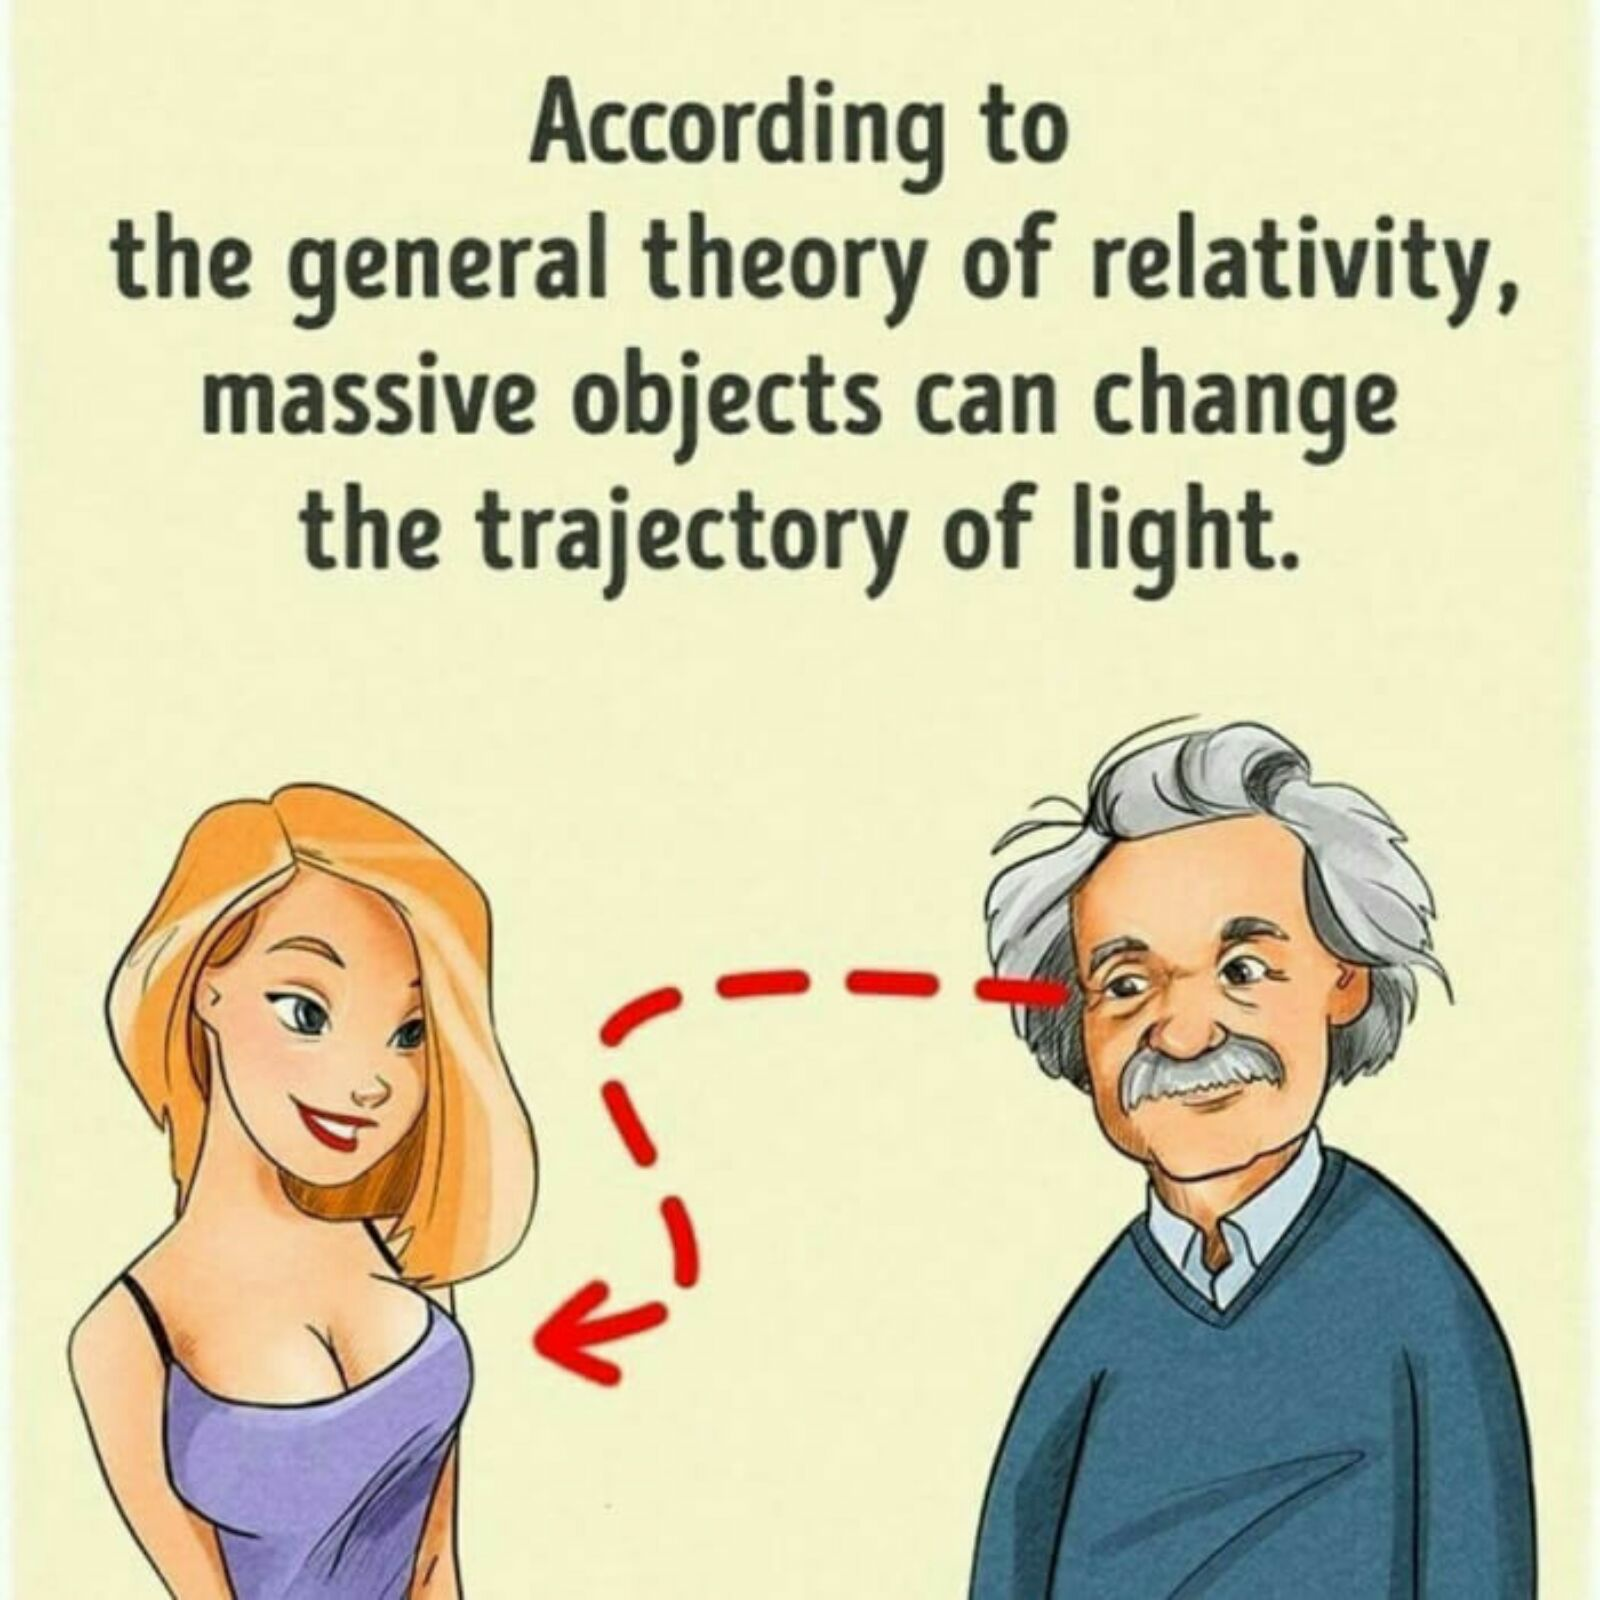 albert einstein meme - According to the general theory of relativity, massive objects can change the trajectory of light.